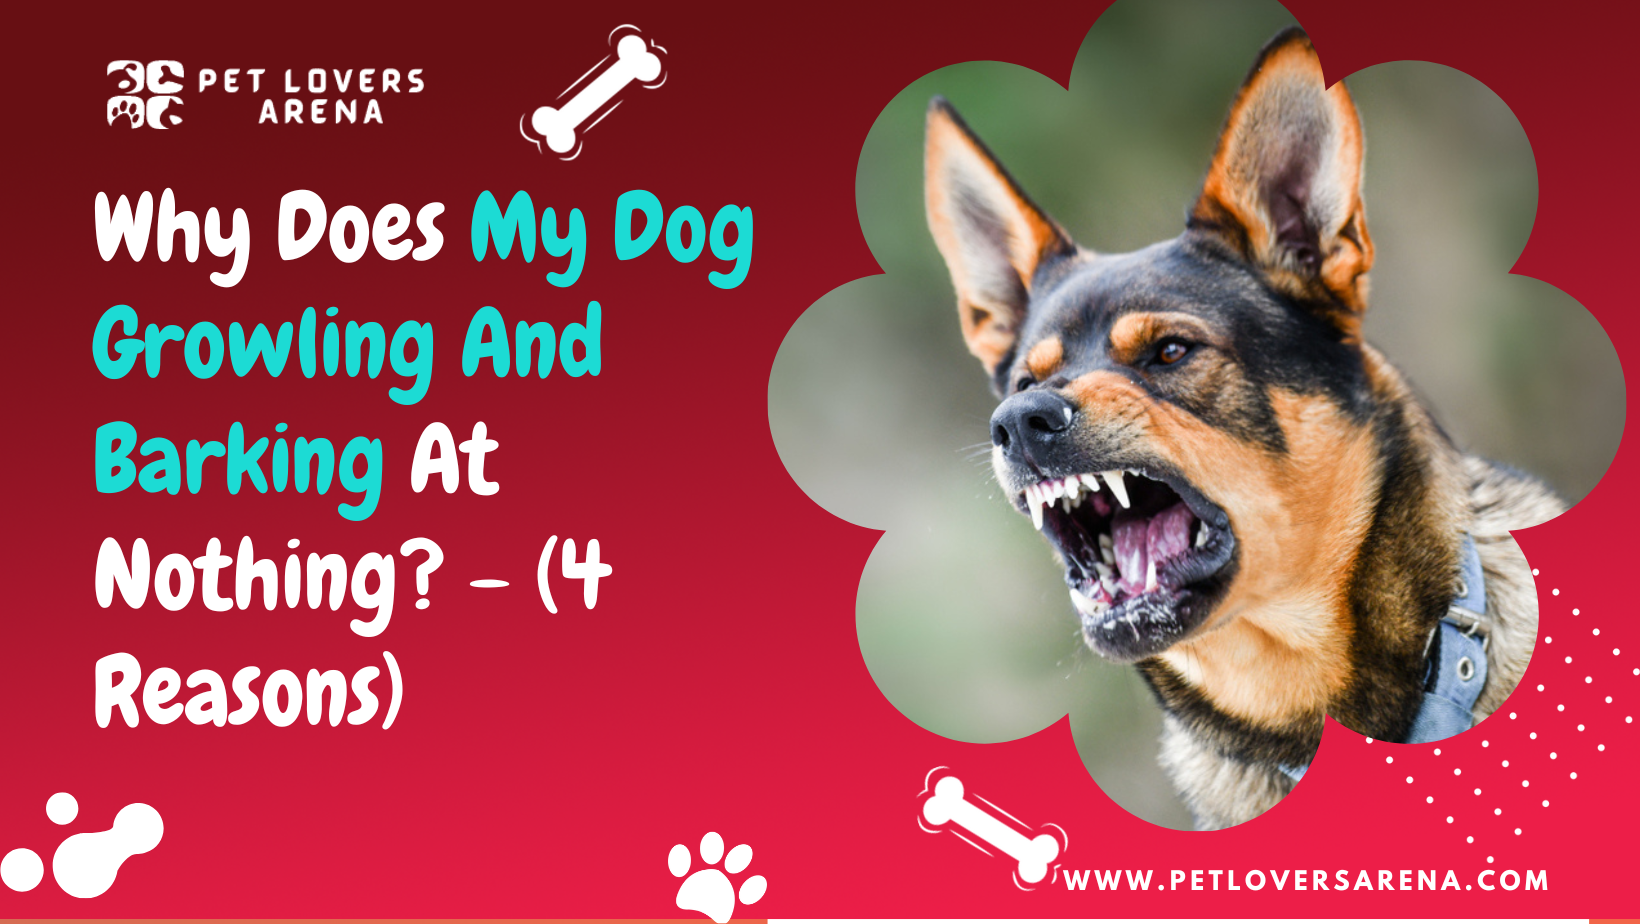 Why Does My Dog Growling And Barking At Nothing? – (4 Reasons)